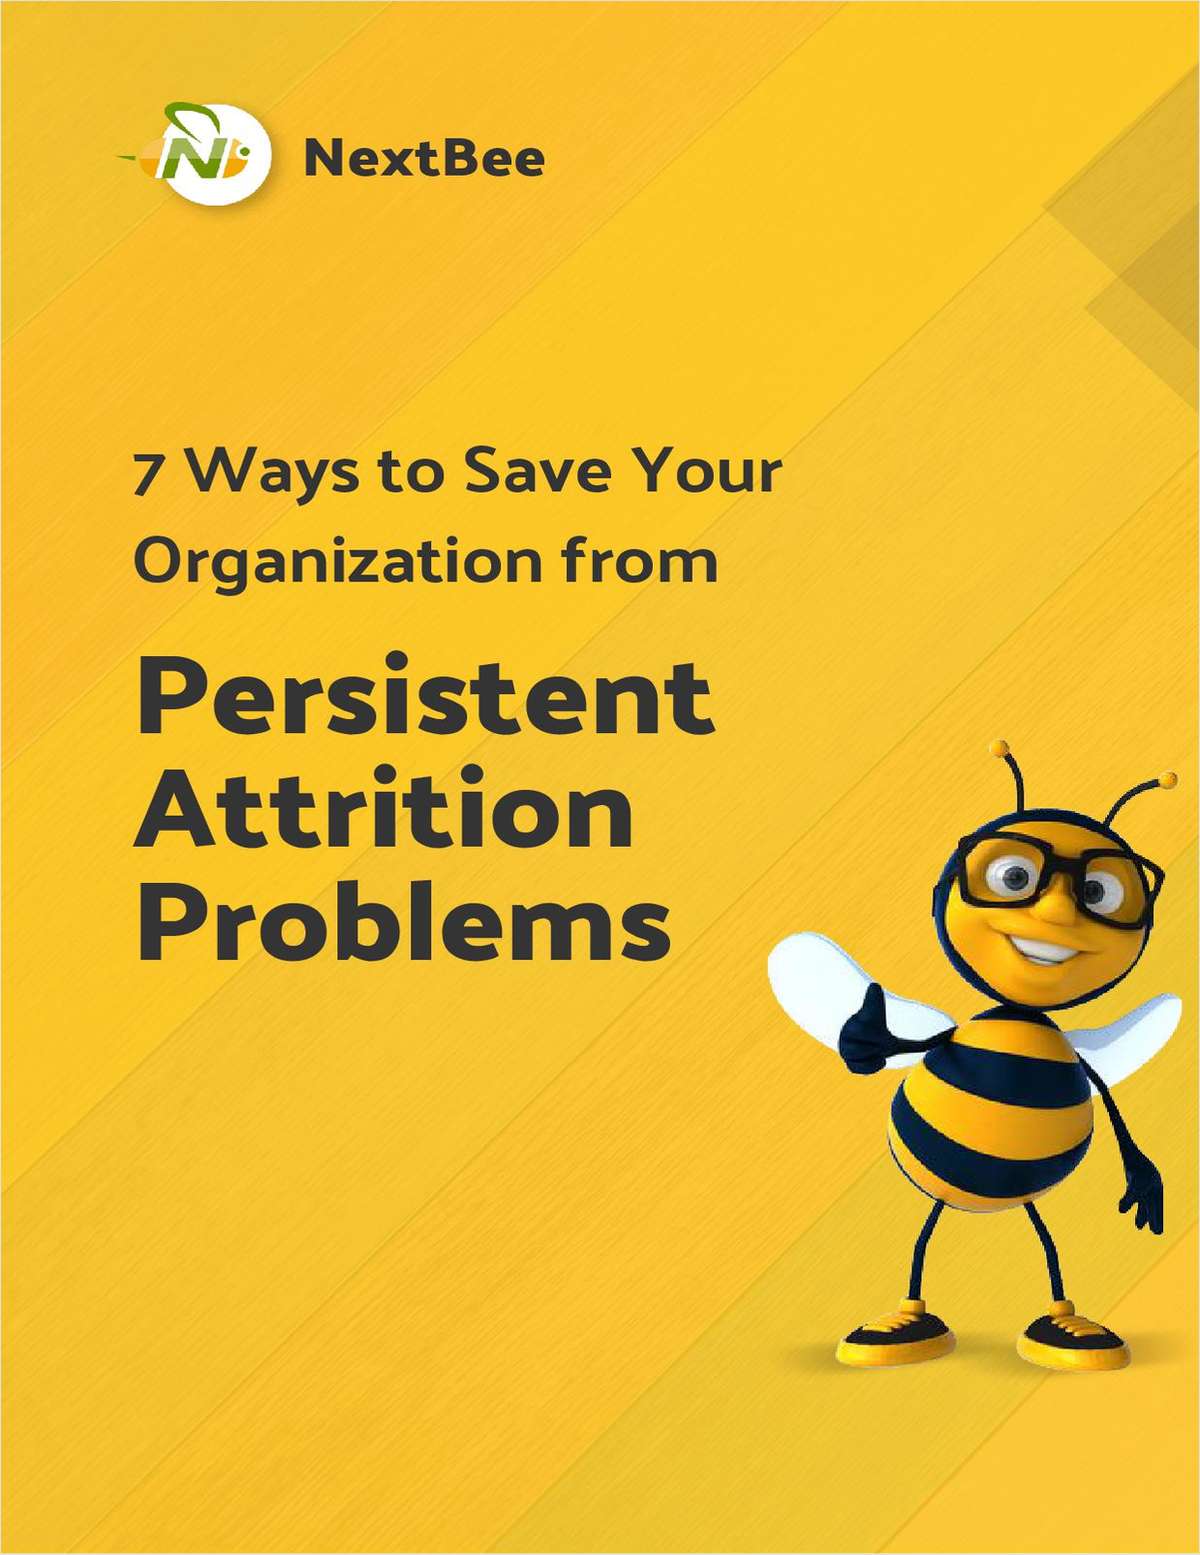 7 Ways to Save Your Organization from a Persistent Attrition Problem